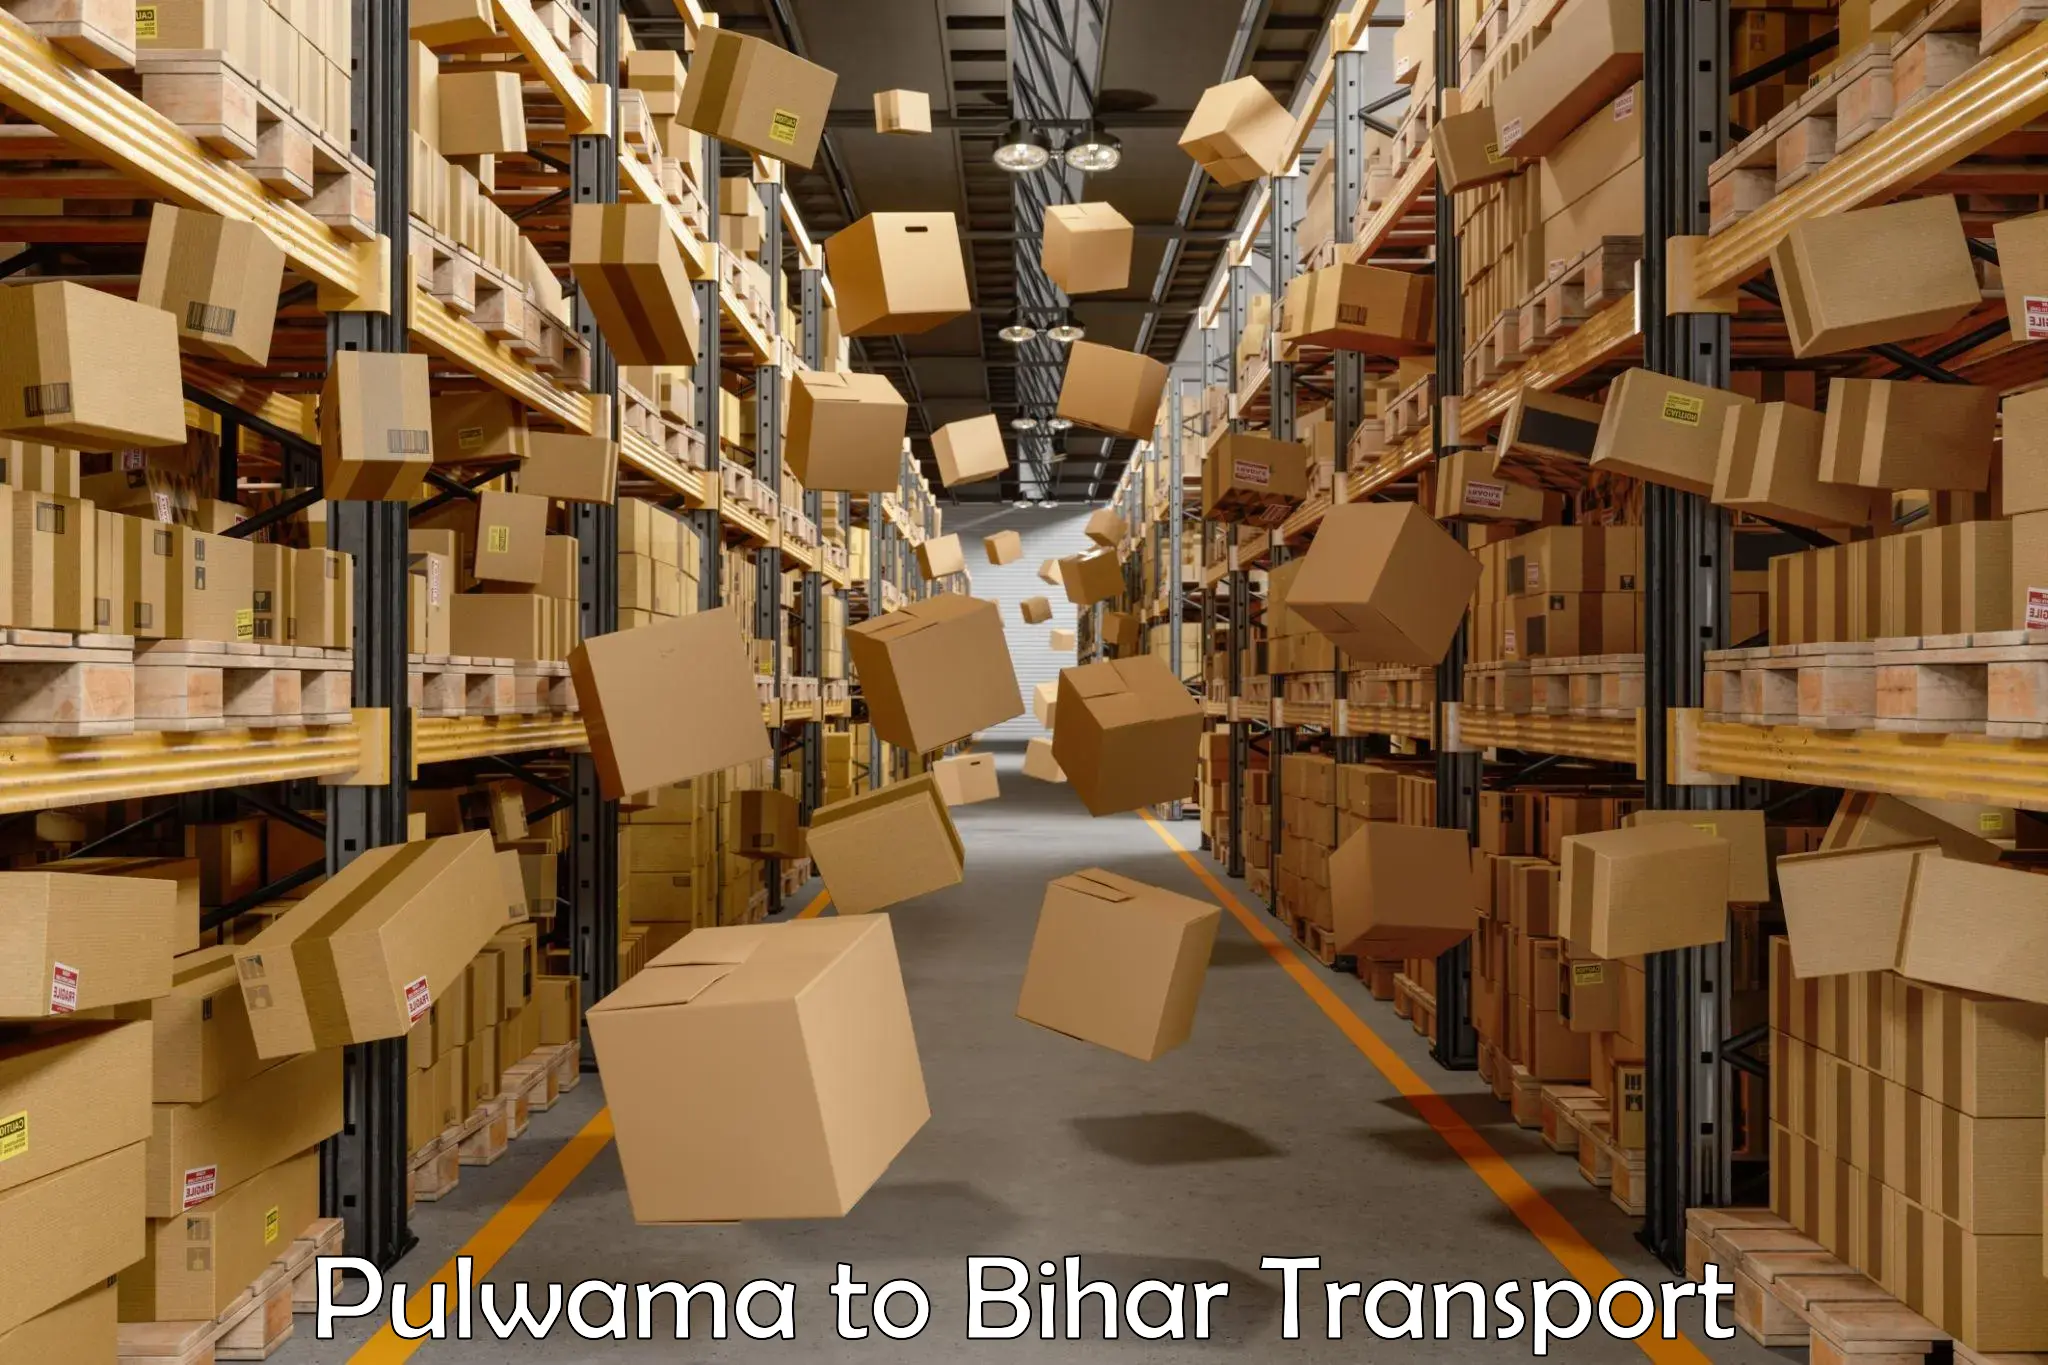 Truck transport companies in India Pulwama to Supaul